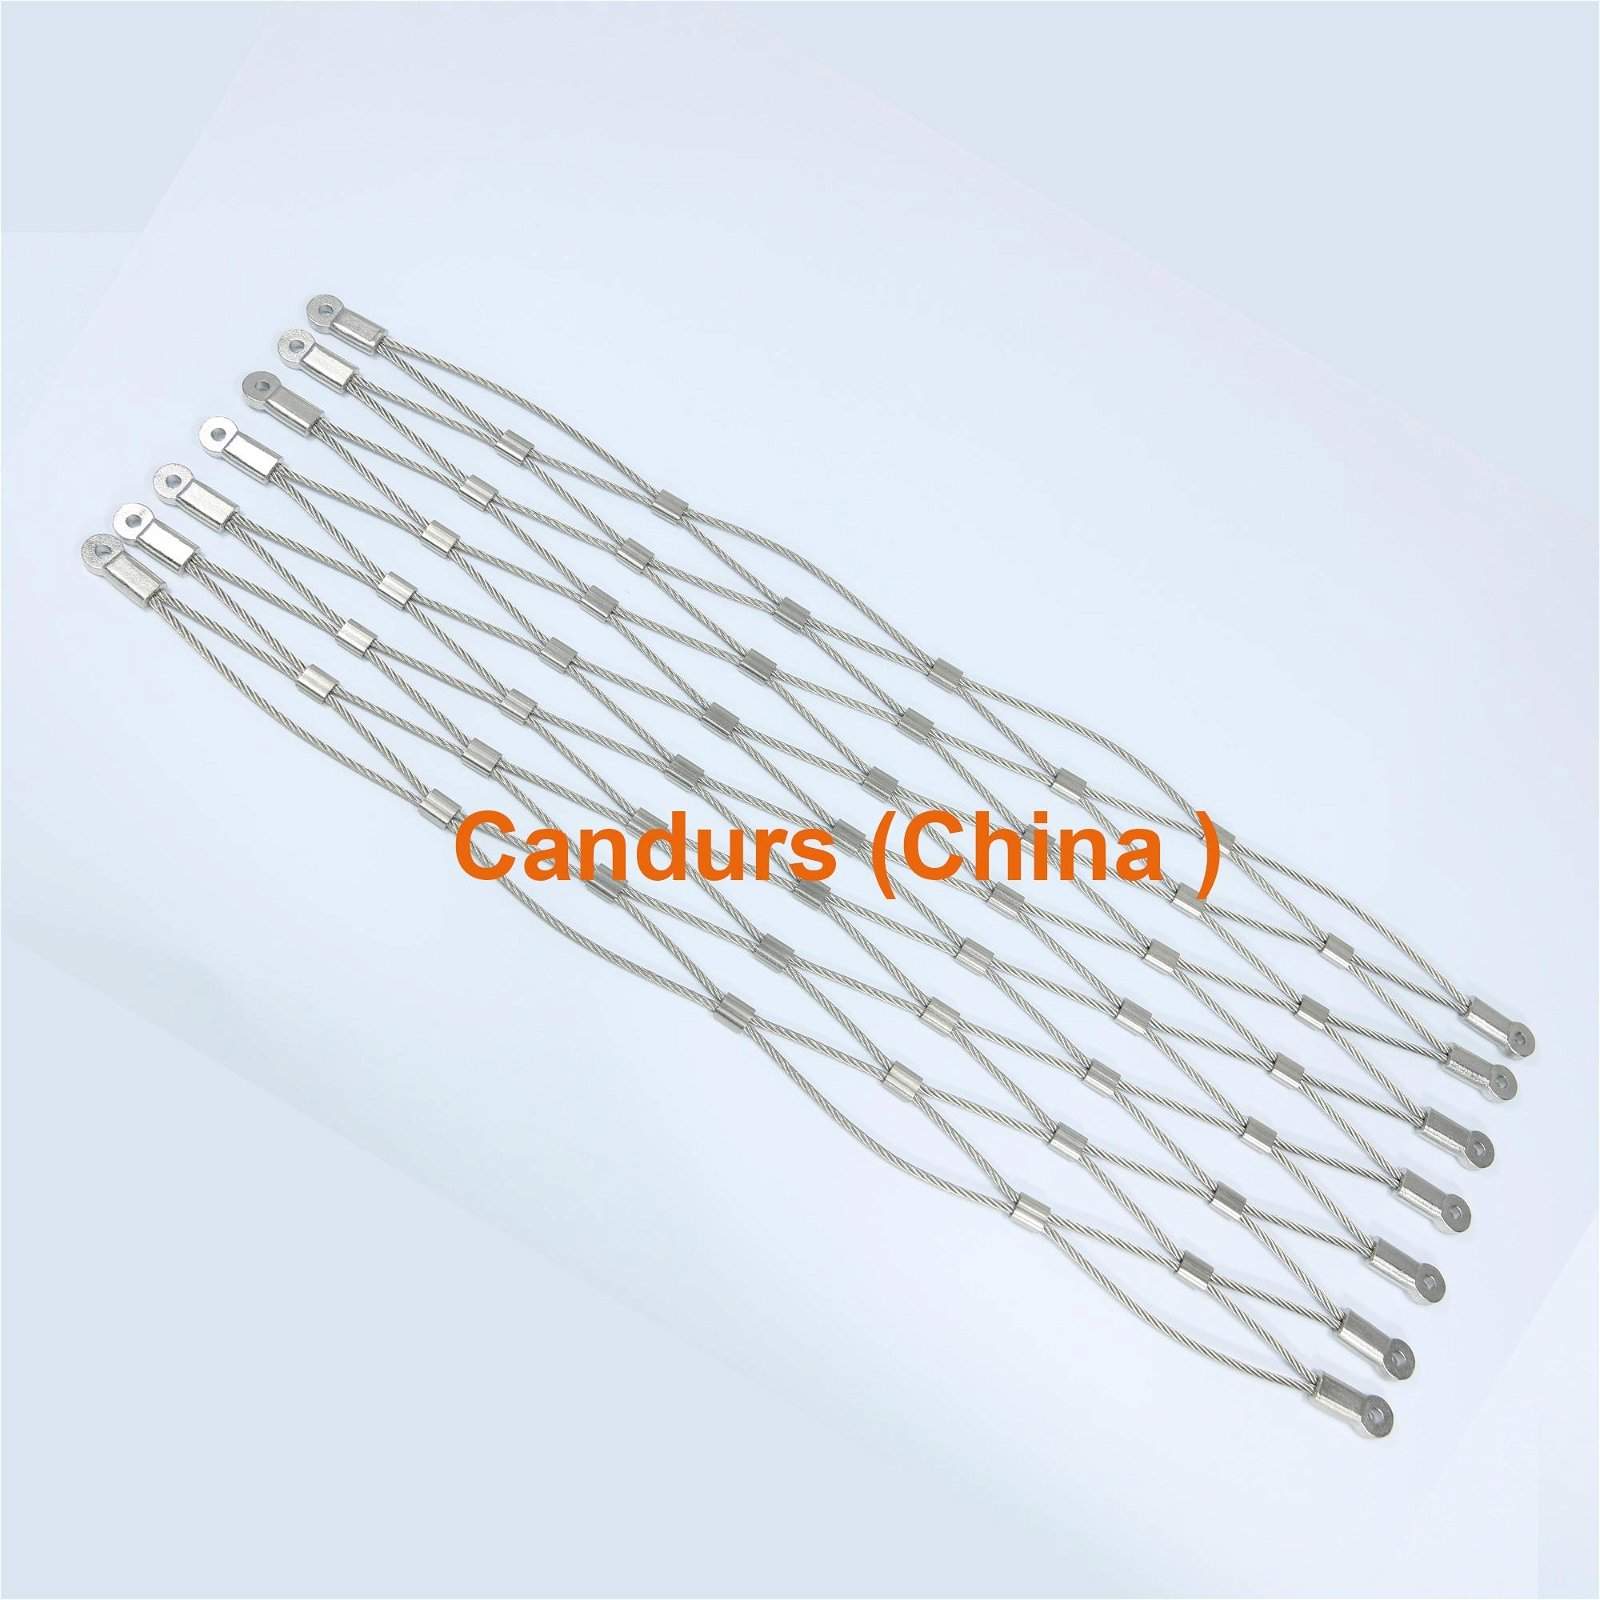 2.0mm 100 mm Mesh 316 Flexible Stainless Steel Wire Cable Mesh 5